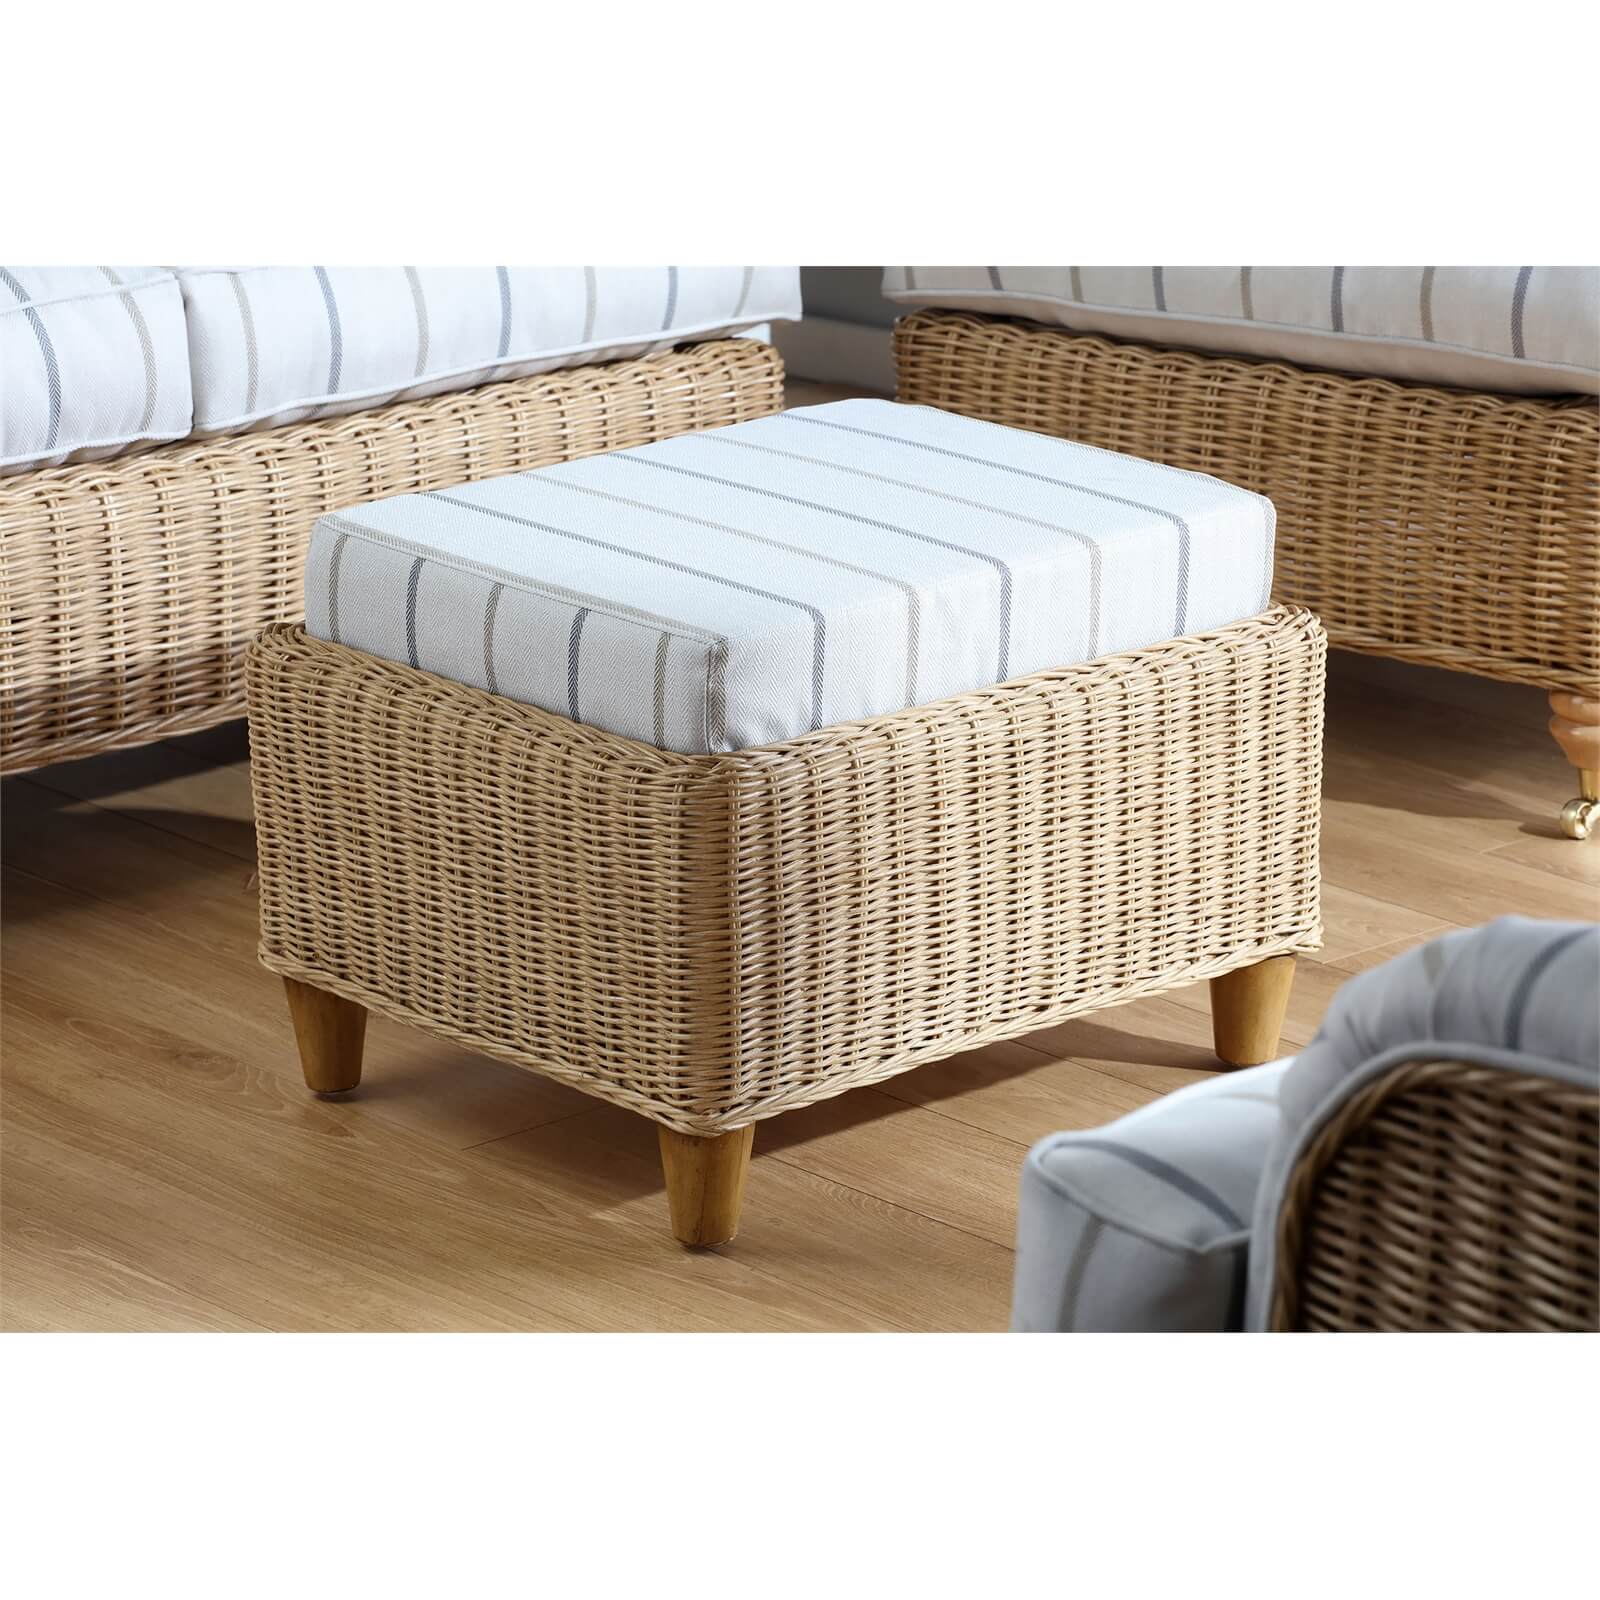 Seville Footstool In Linen Taupe